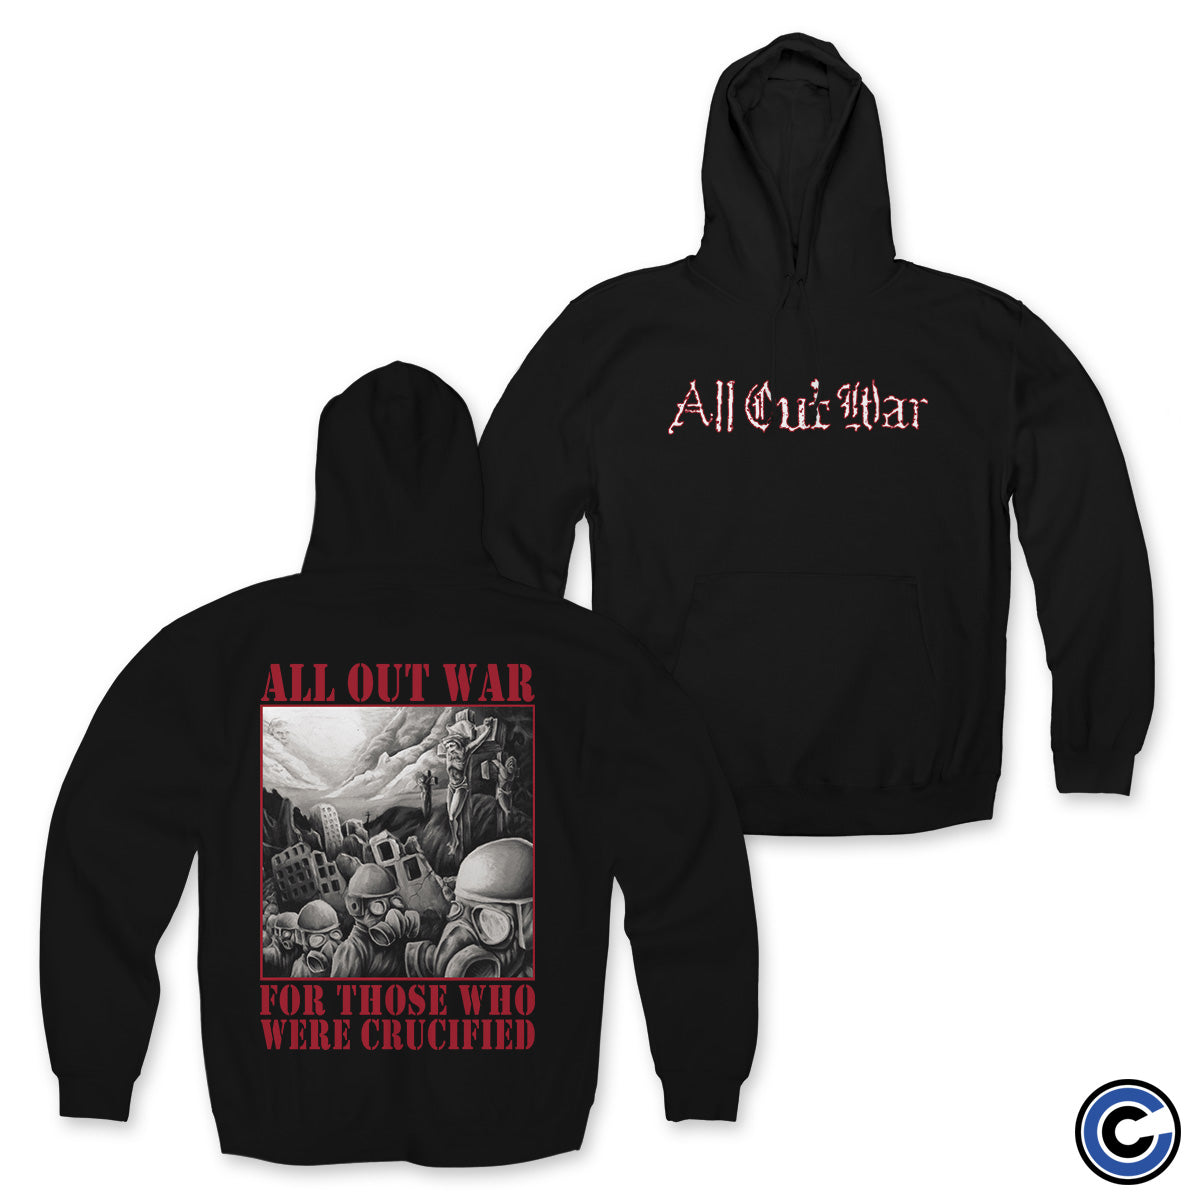 All Out War "For Those" Hoodie